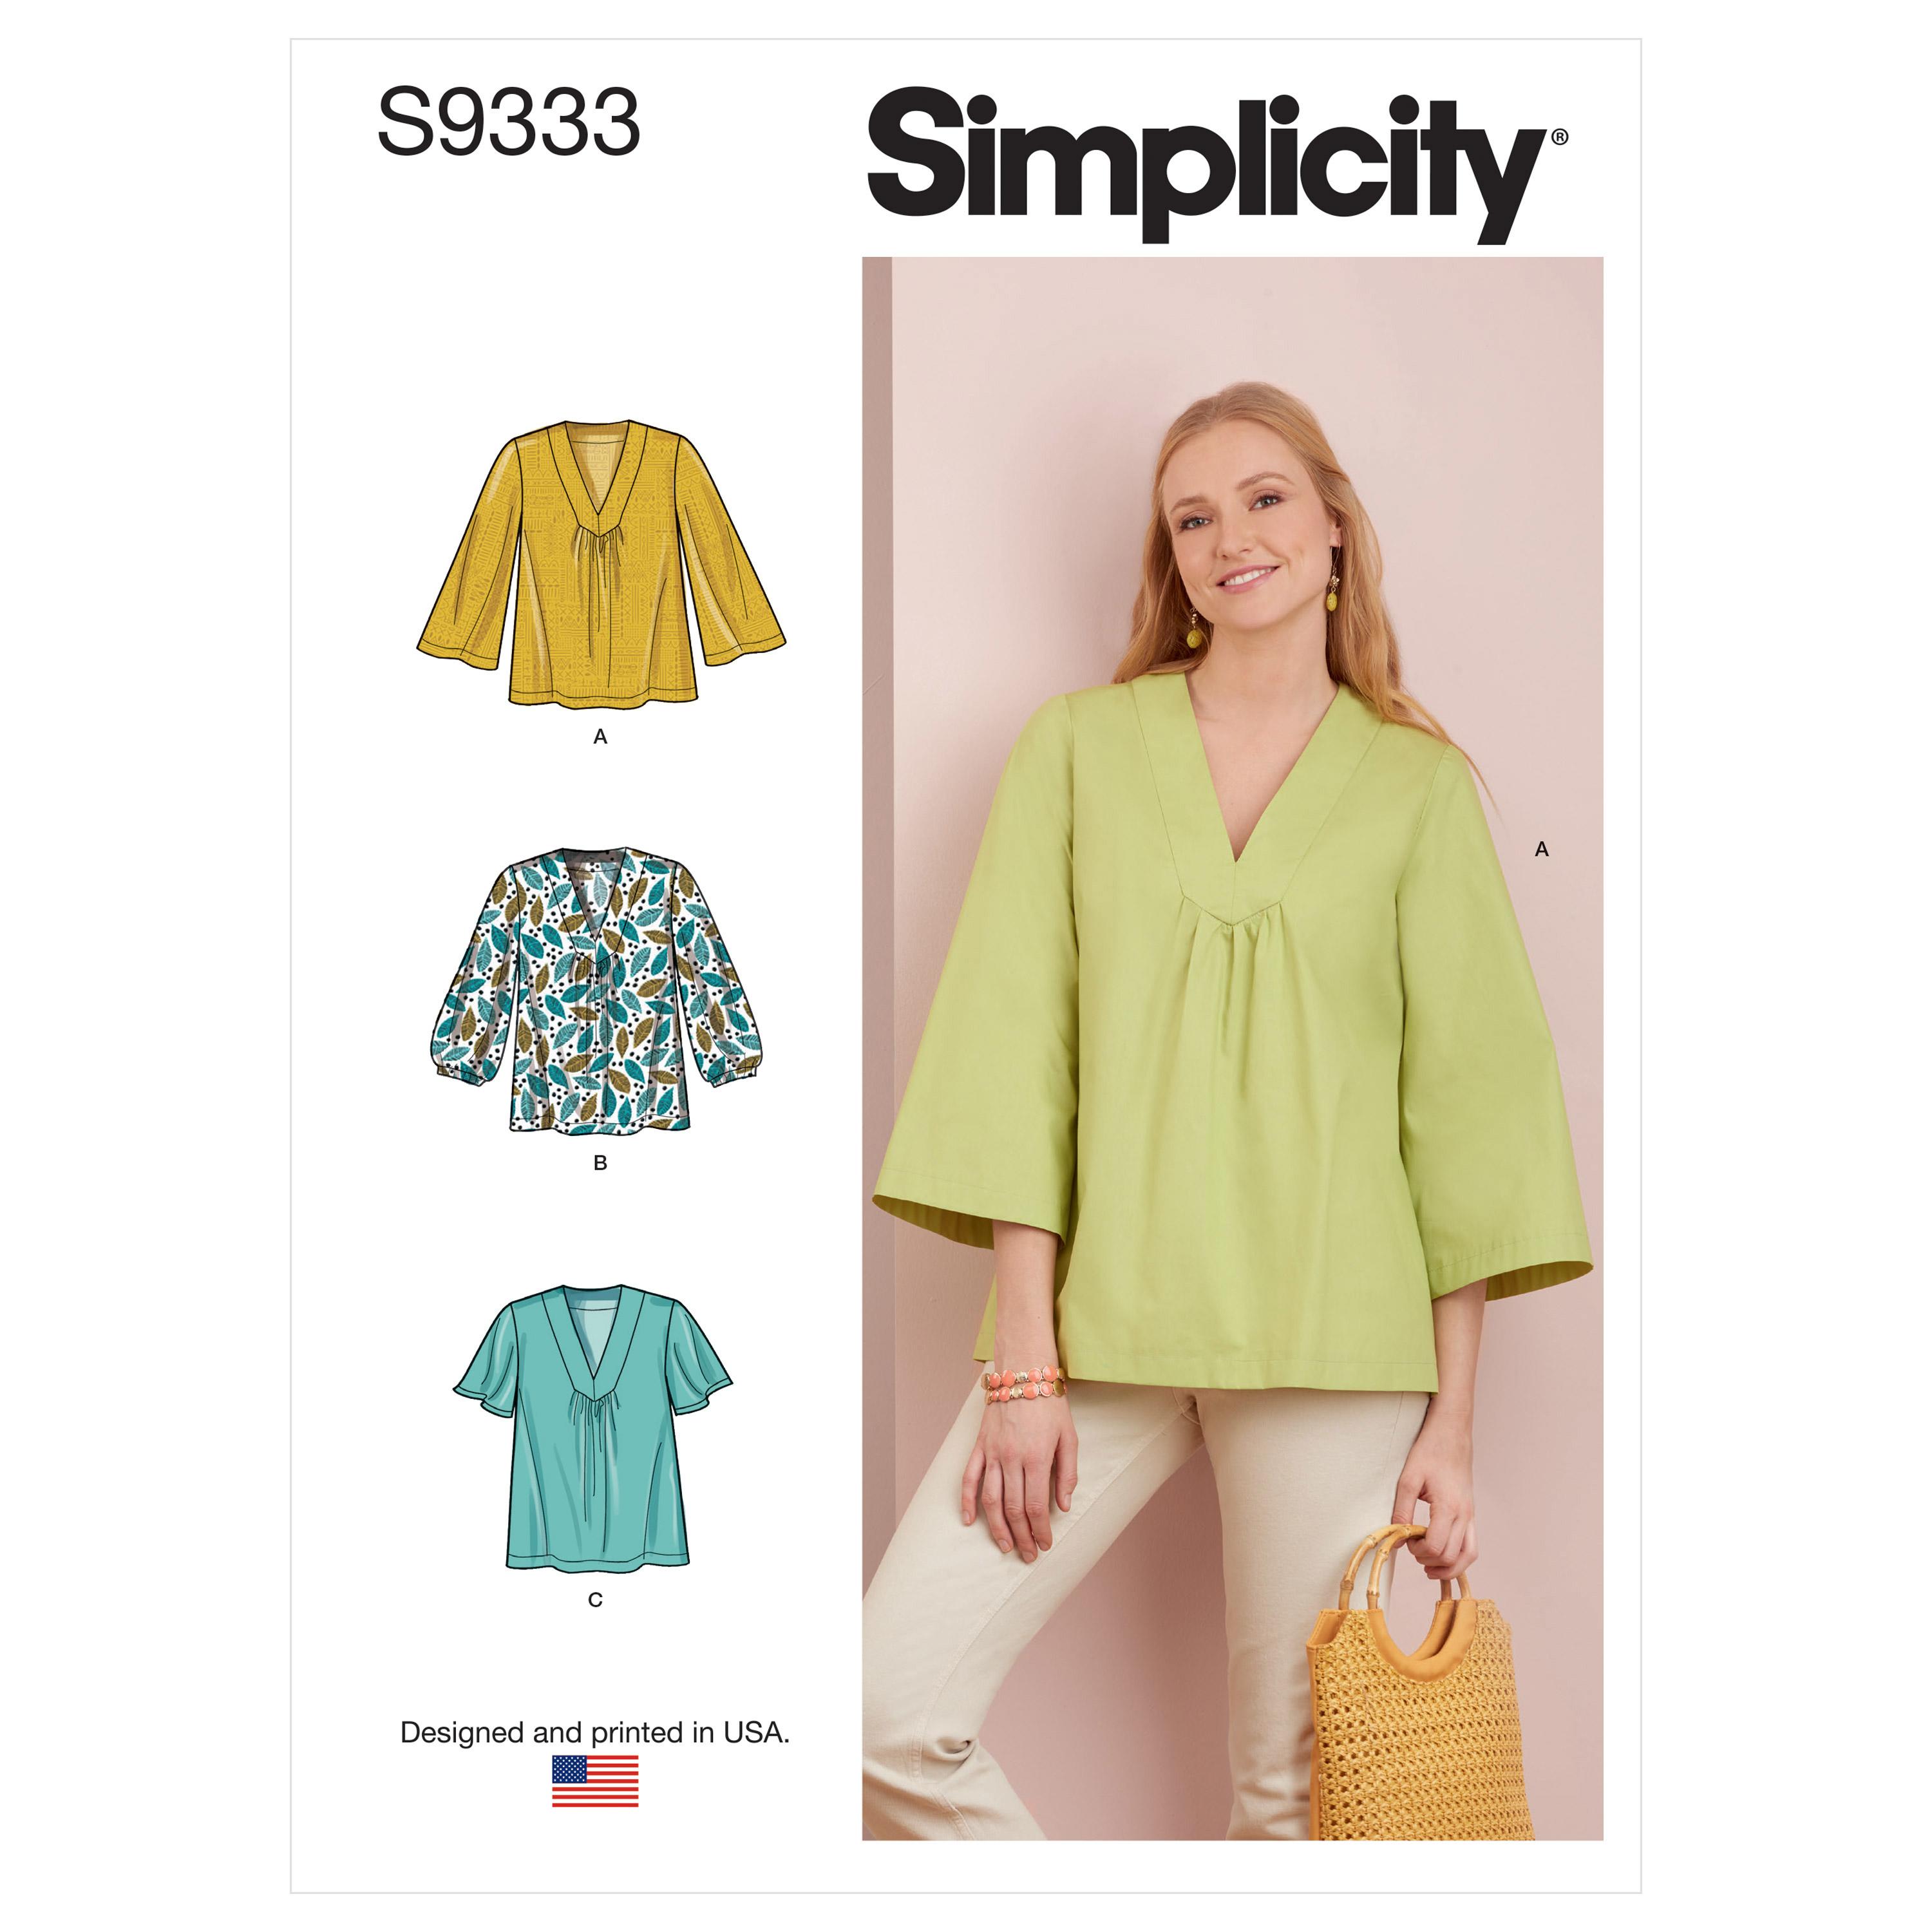 Simplicity Sewing Pattern S9333 Misses' Top with Sleeve Variations